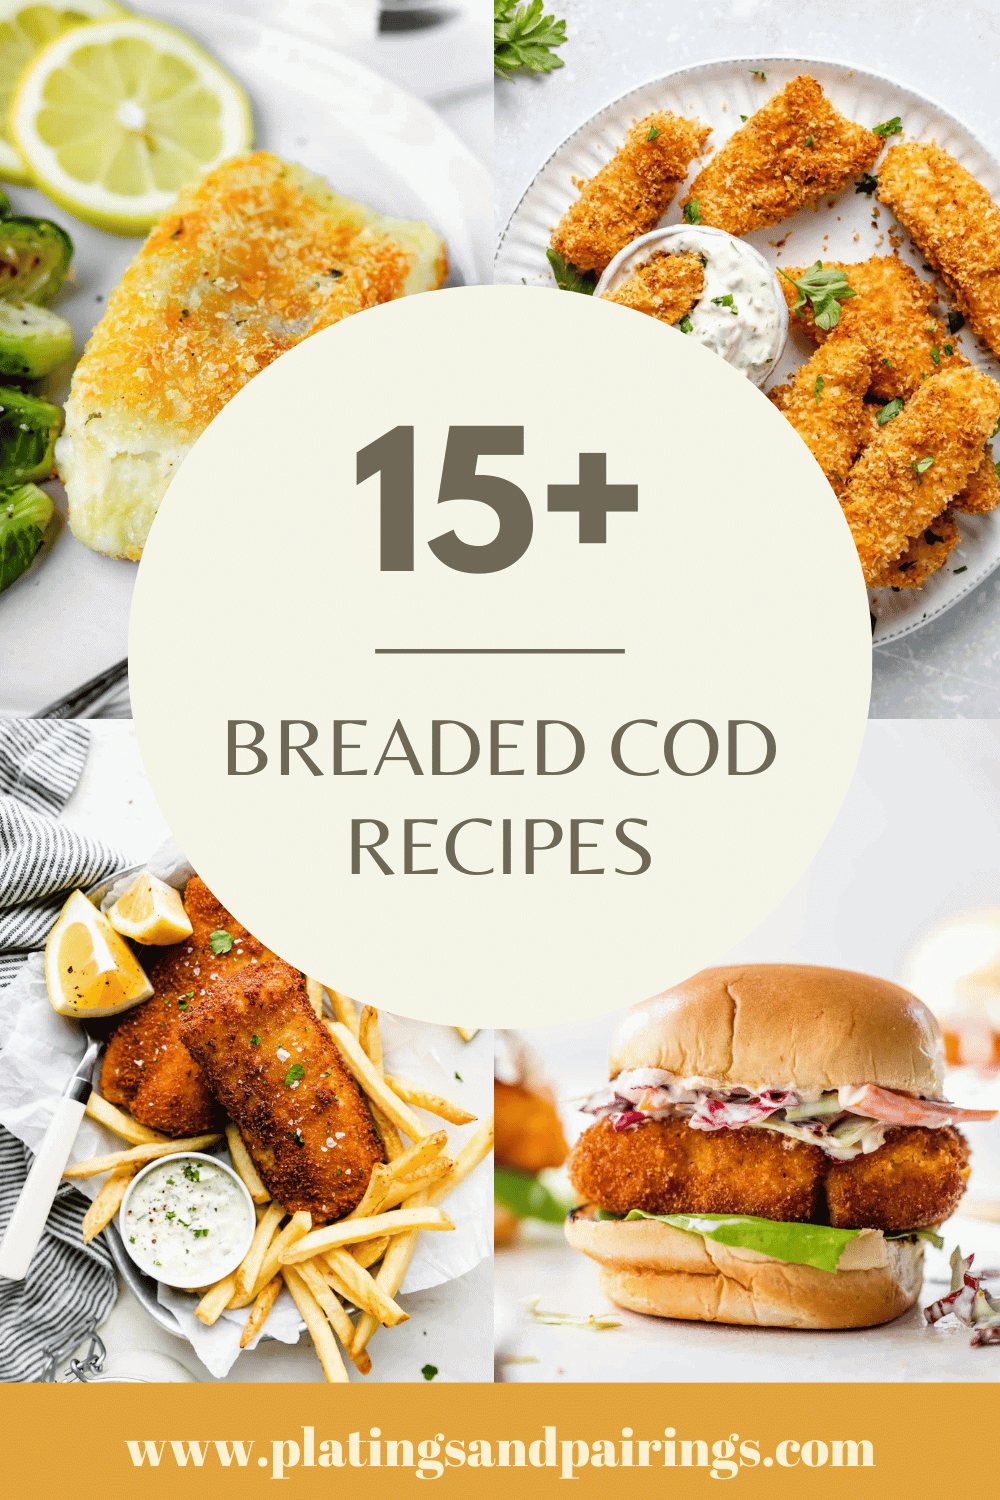 Collage of breaded cod recipes with text overlay.